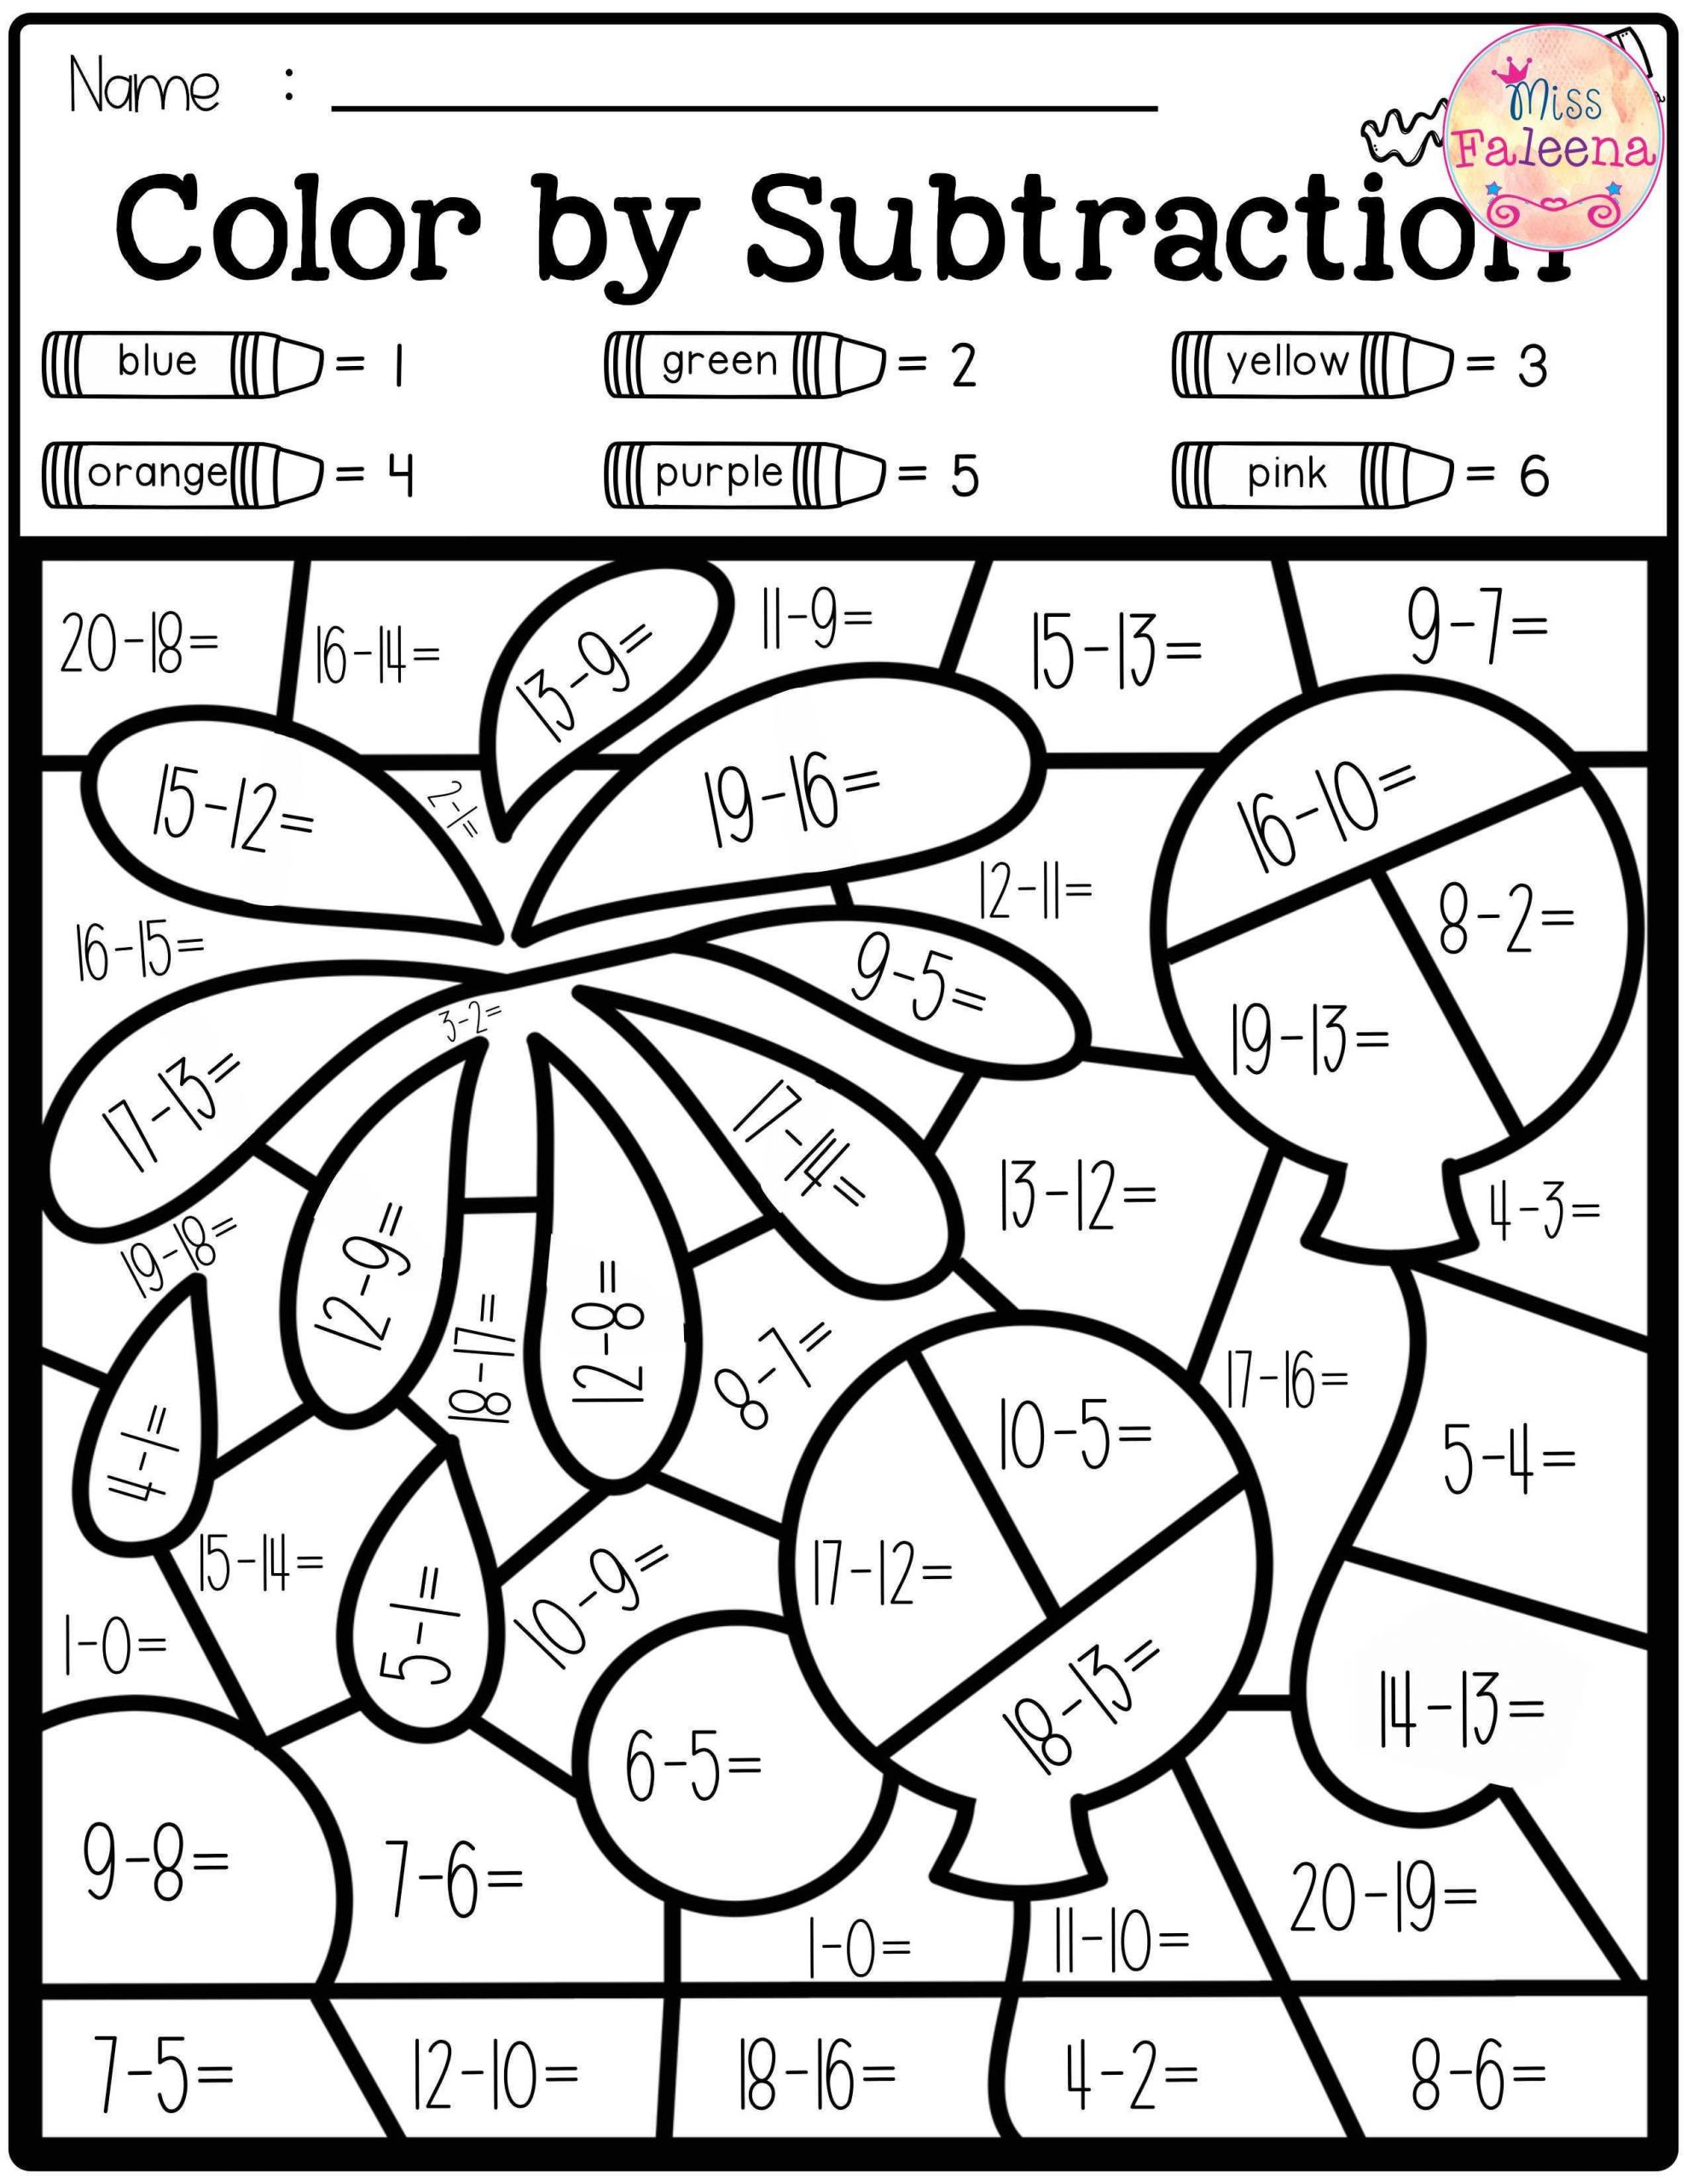 Free Math Worksheets Third Grade 3 Division Division Facts Missing Number 1 10